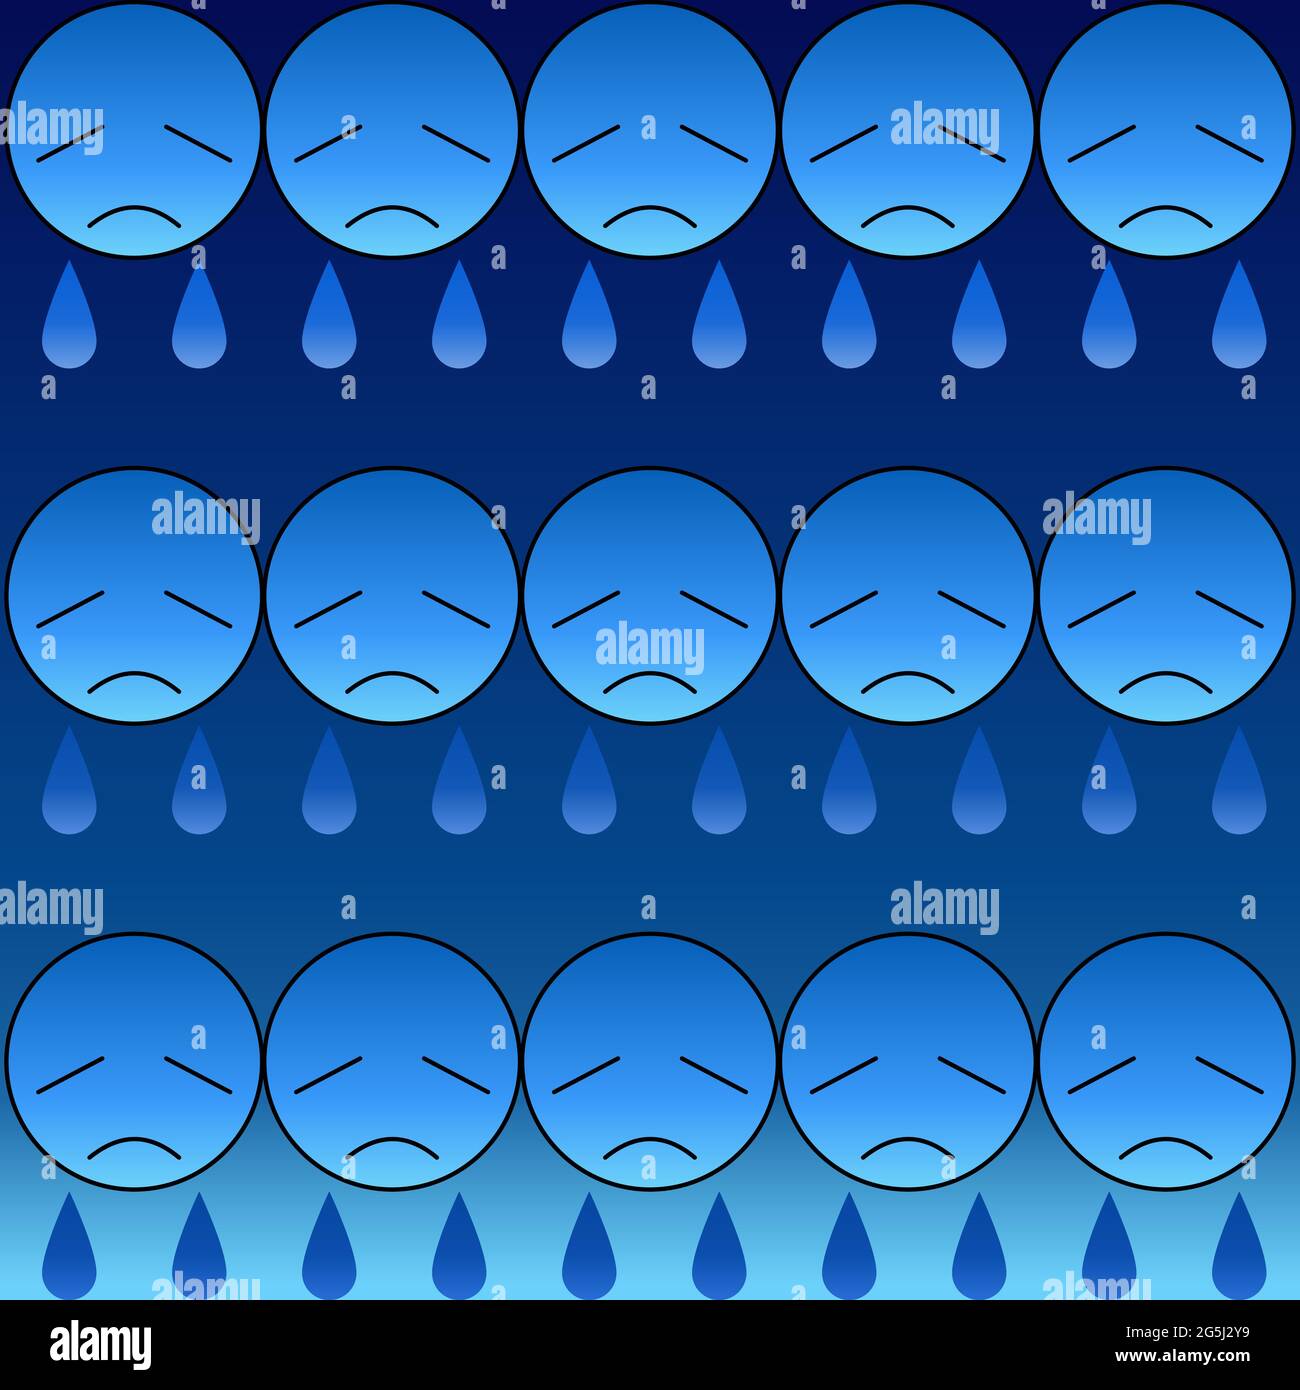 Sad emotional face in blue with teardrop 04 Stock Vector